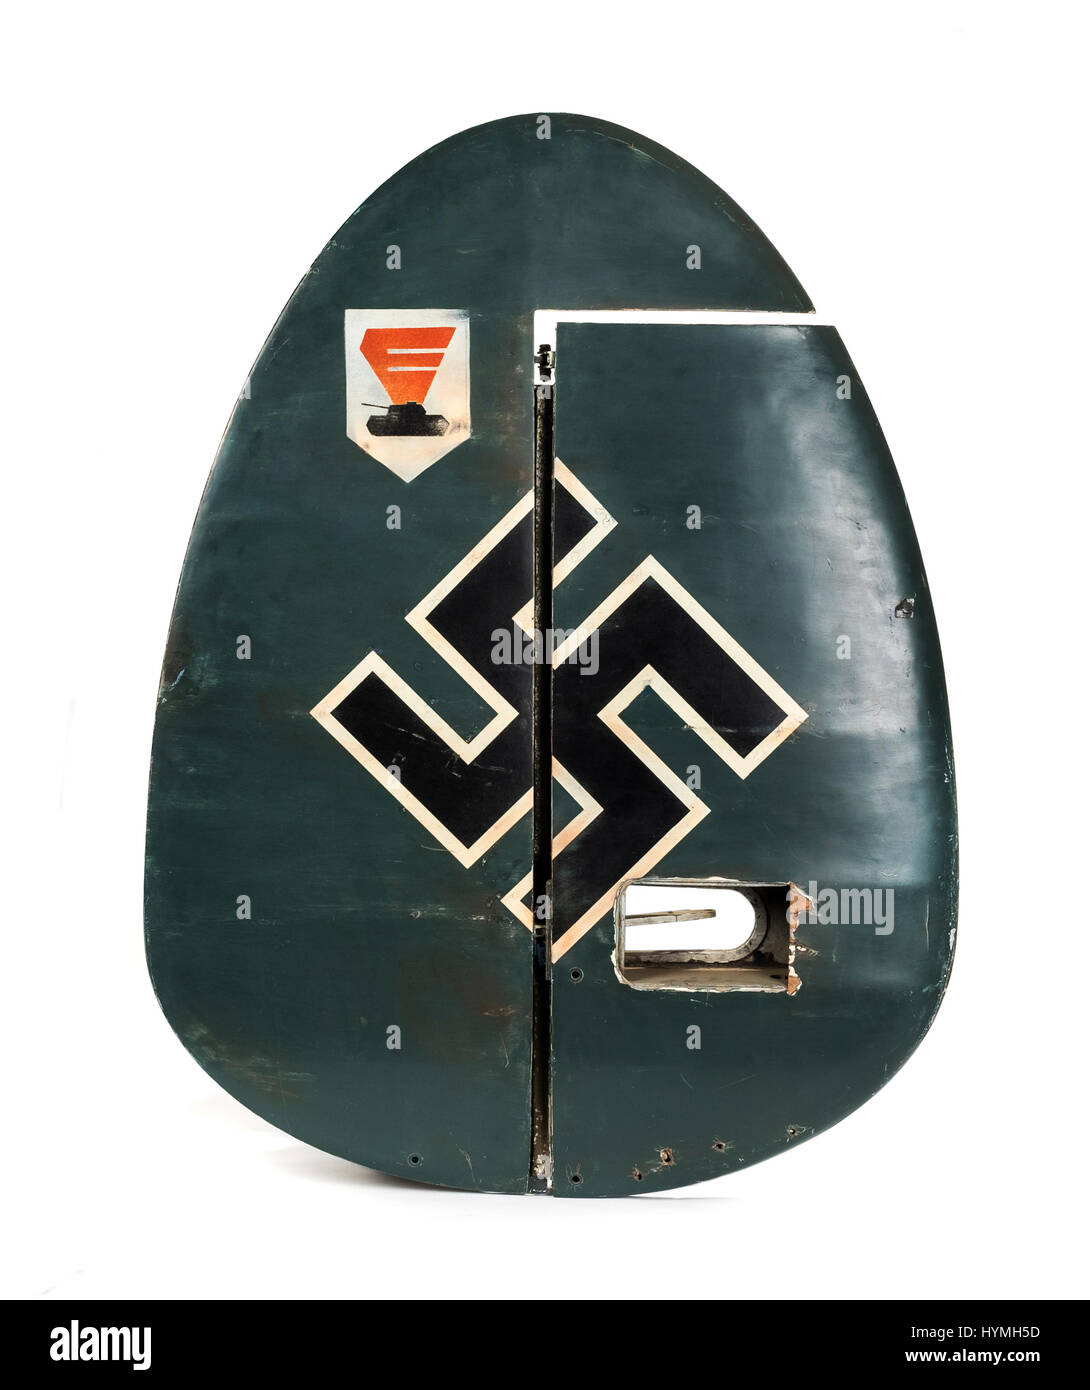 An authentic WW2 German Luftwaffe aircraft tail fin with Swastika insignia and tank crest Stock Photo